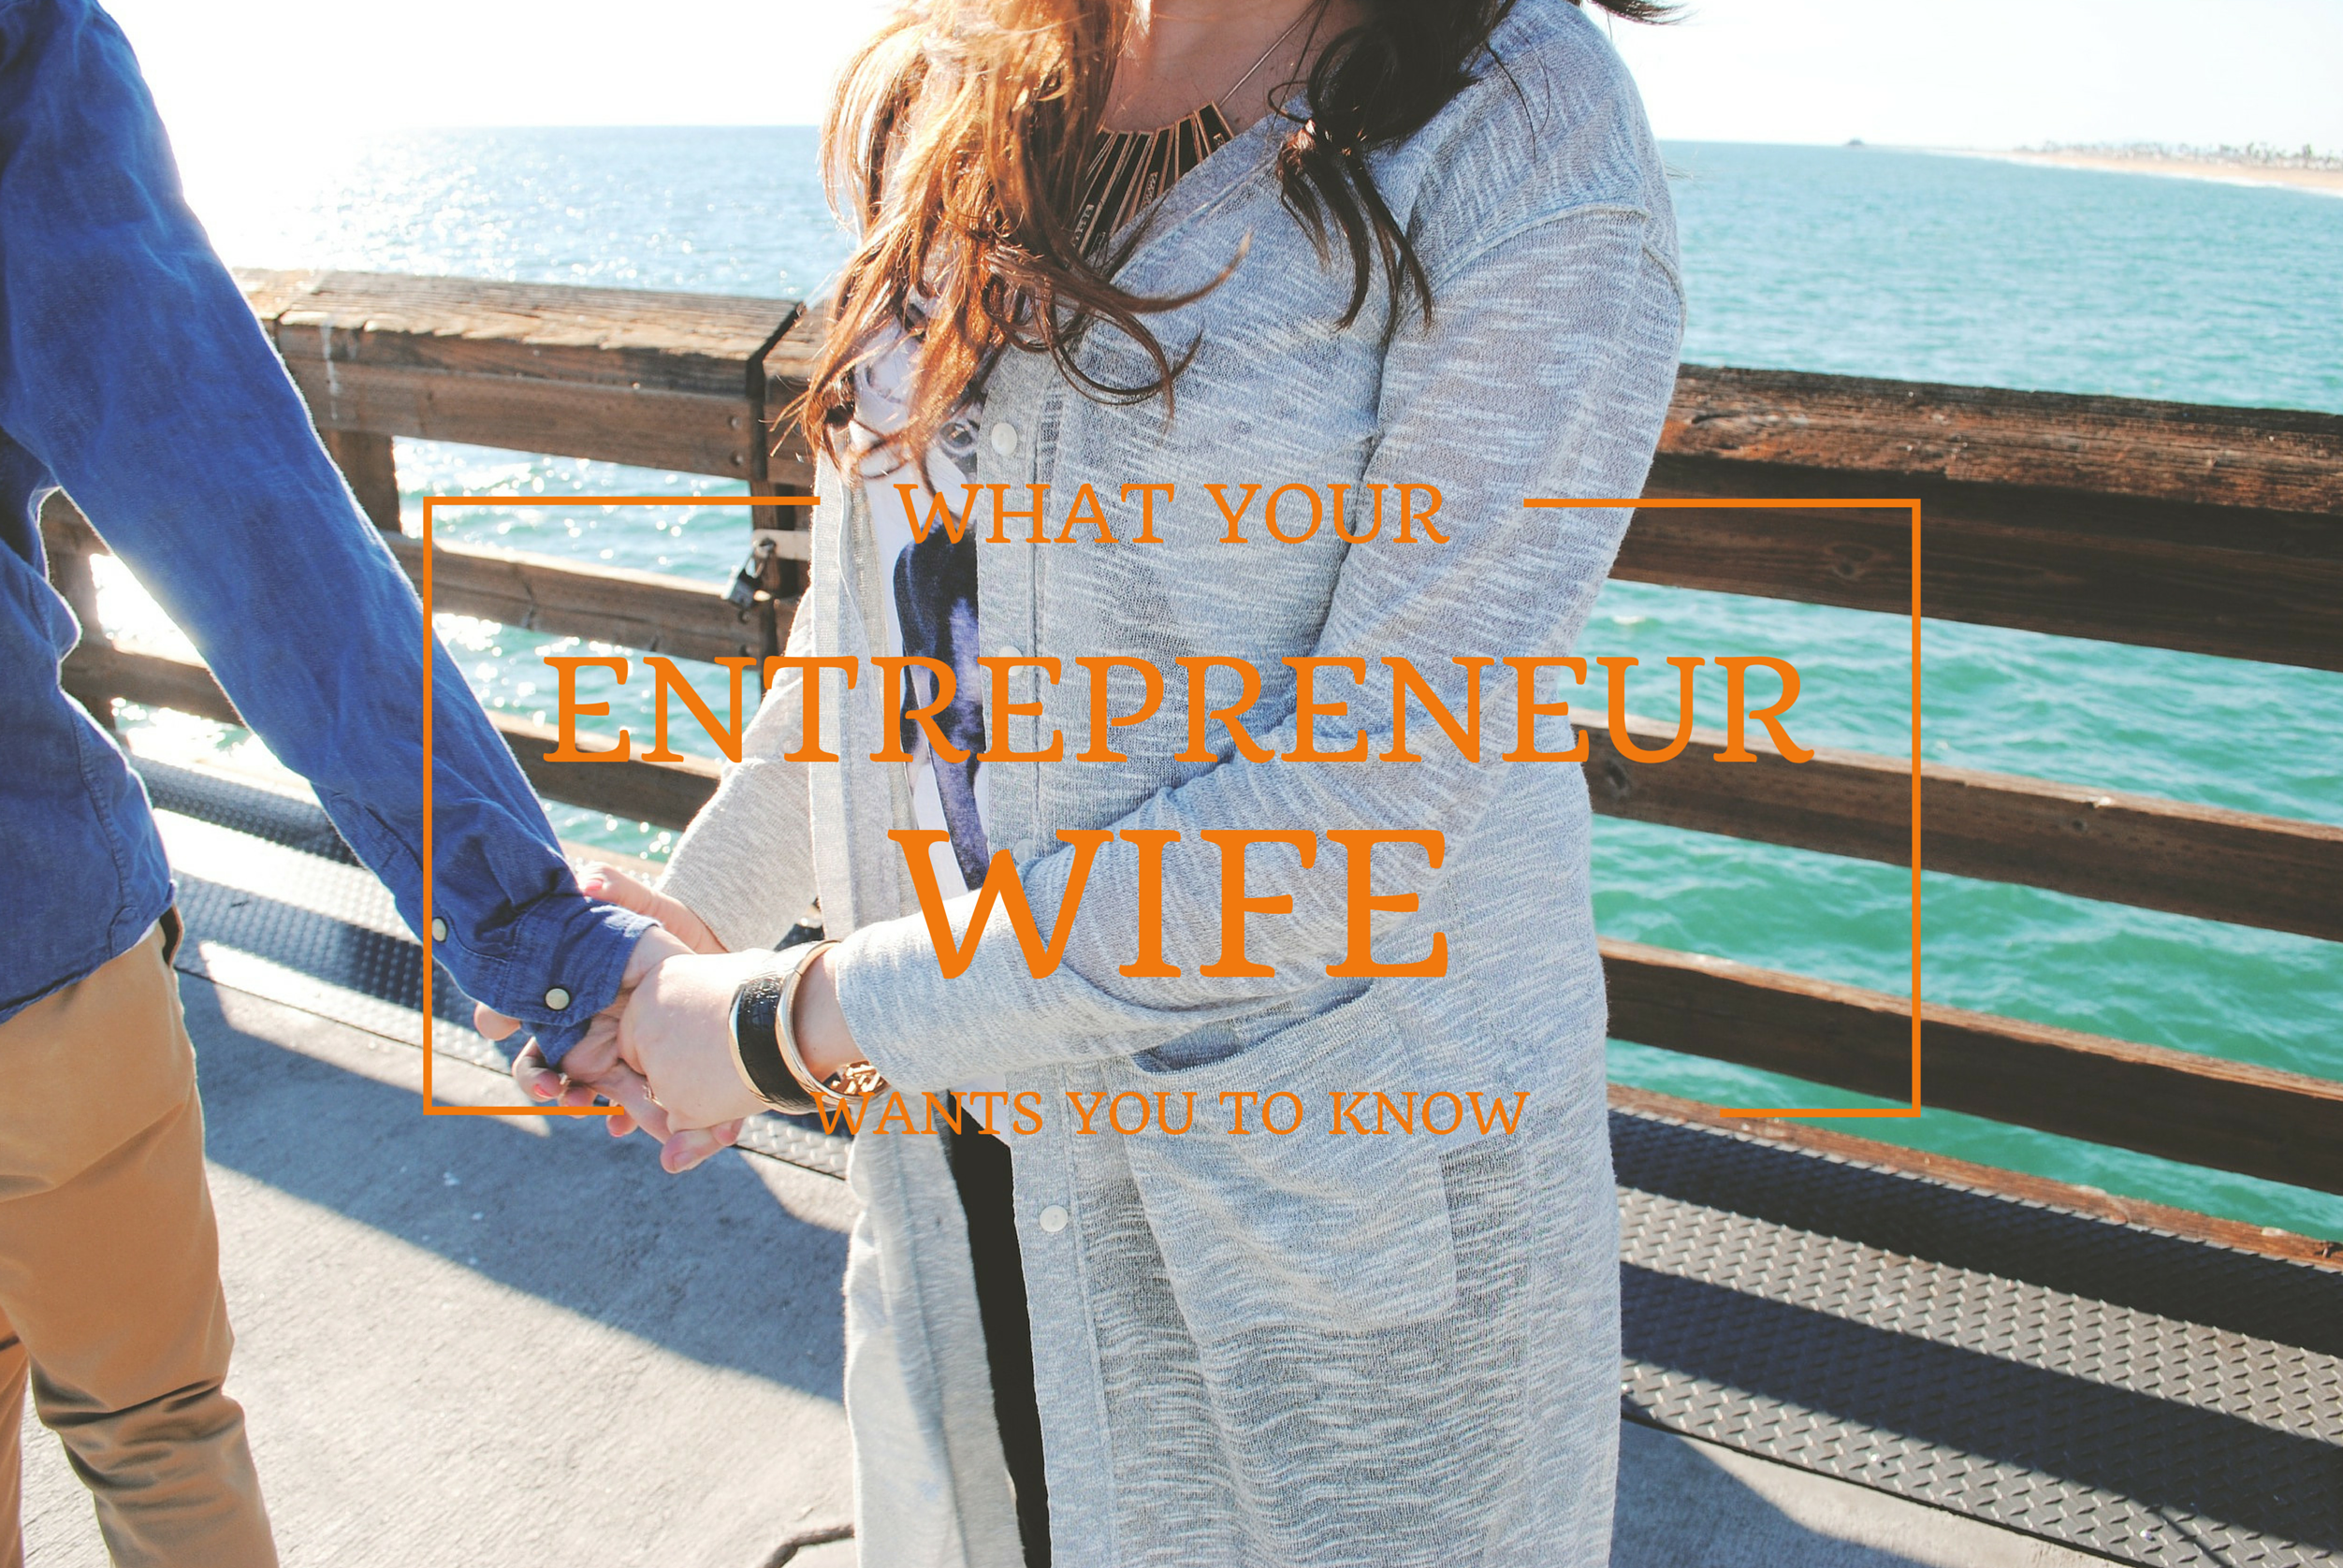 8 Things Your Entrepreneur Wife Wants You to Know